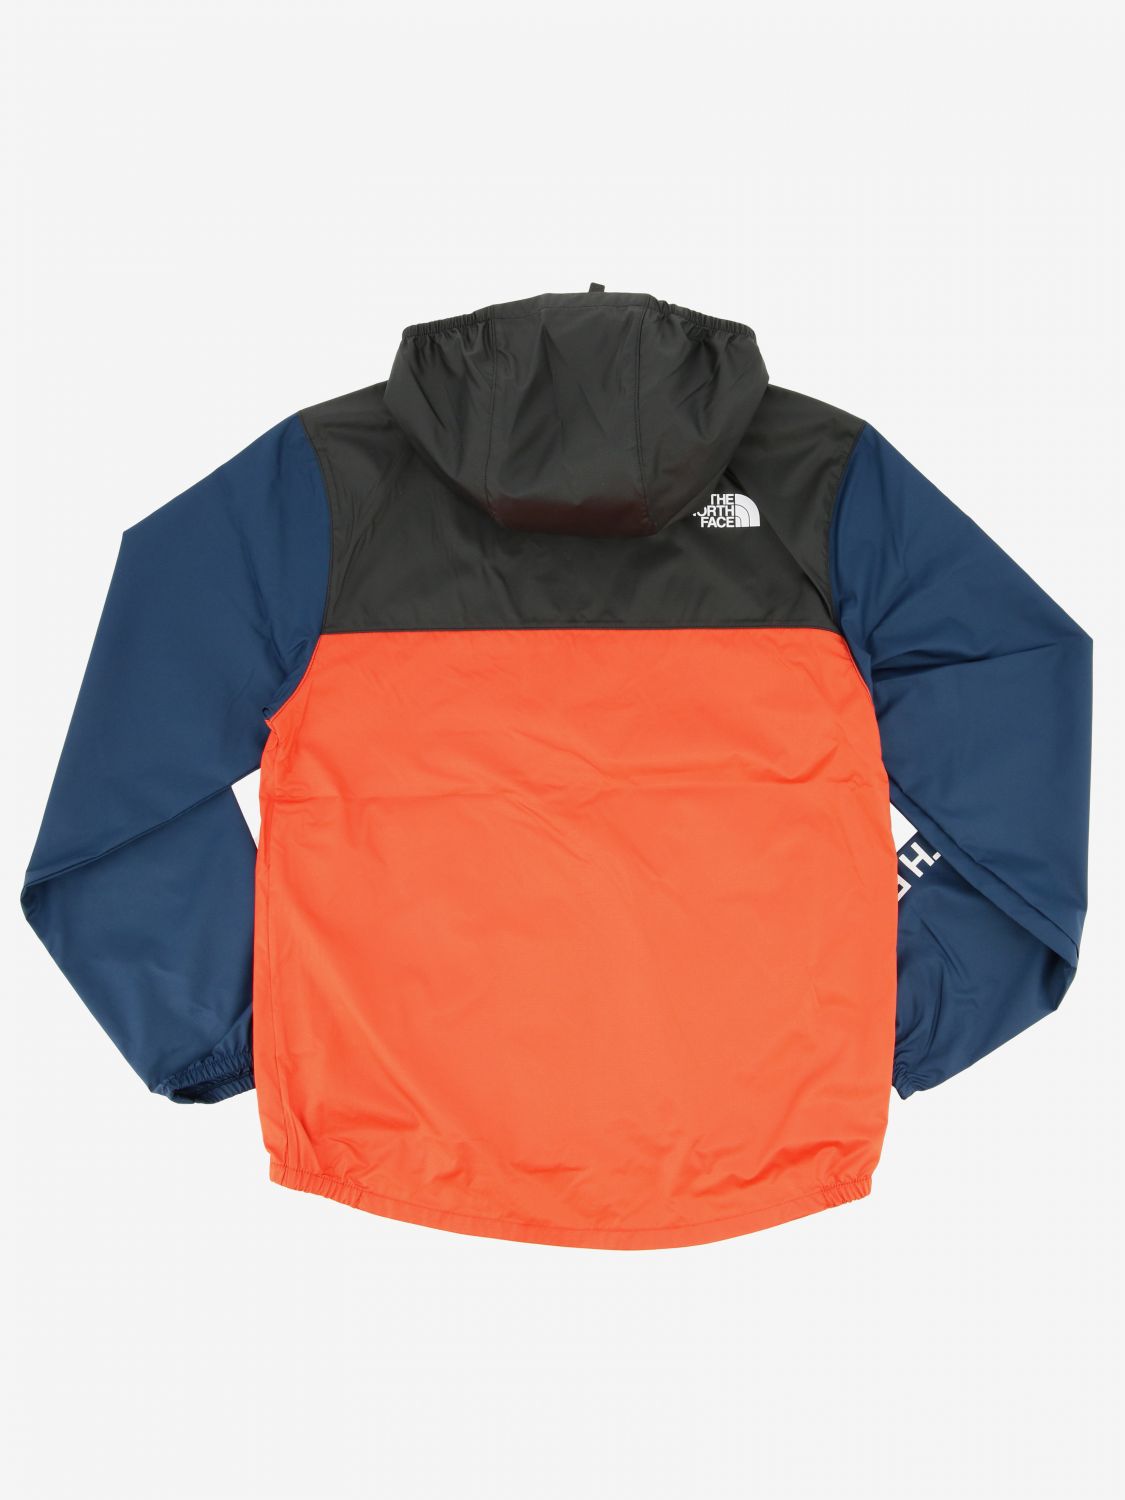 The North Face Sport Jacket In Tricolor Nylon | lupon.gov.ph